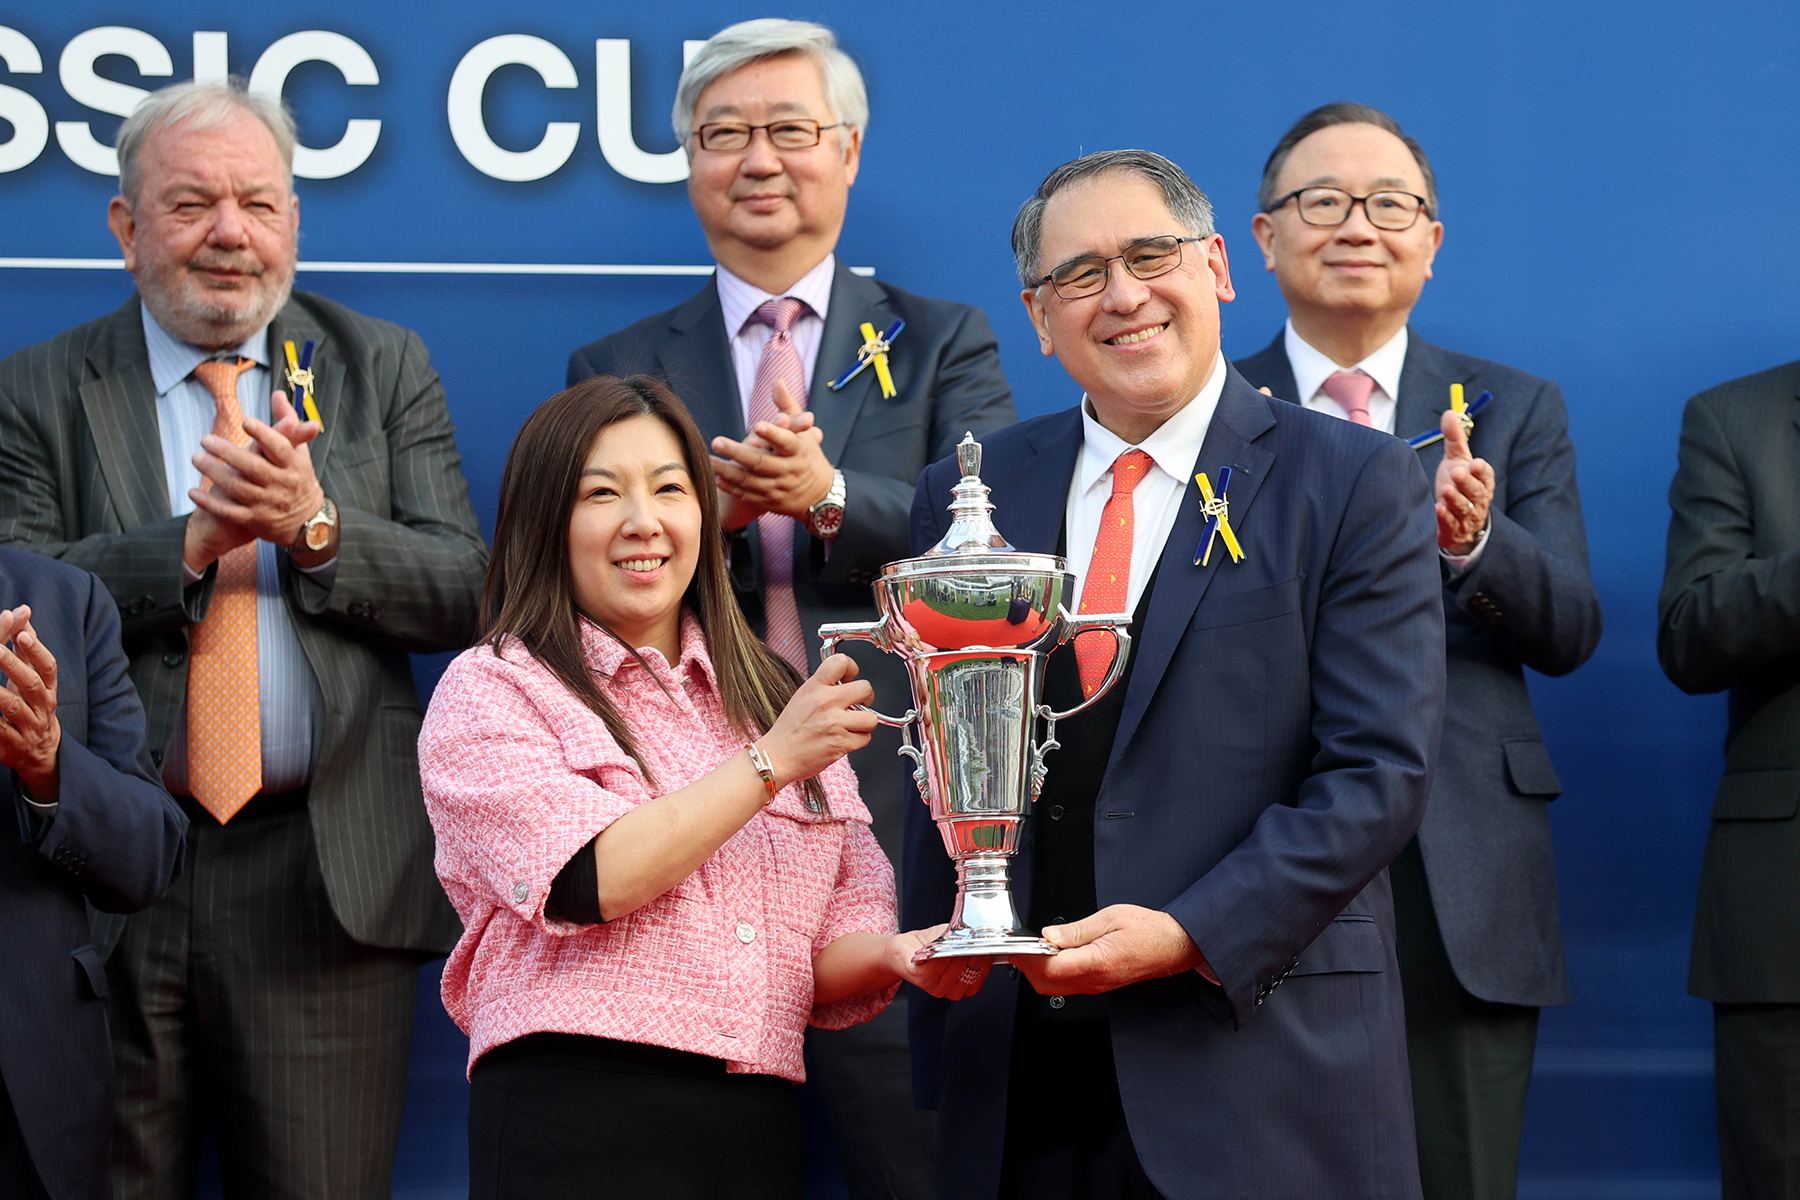 At the presentation ceremony, Club Steward Mr Lester G Huang presents the Hong Kong Classic Cup trophy and gold-plated dishes to Super Sunny Sing’s owner Ms Janice Wong Oi Ying, as well as winning trainer Chris So and jockey Vincent Ho.